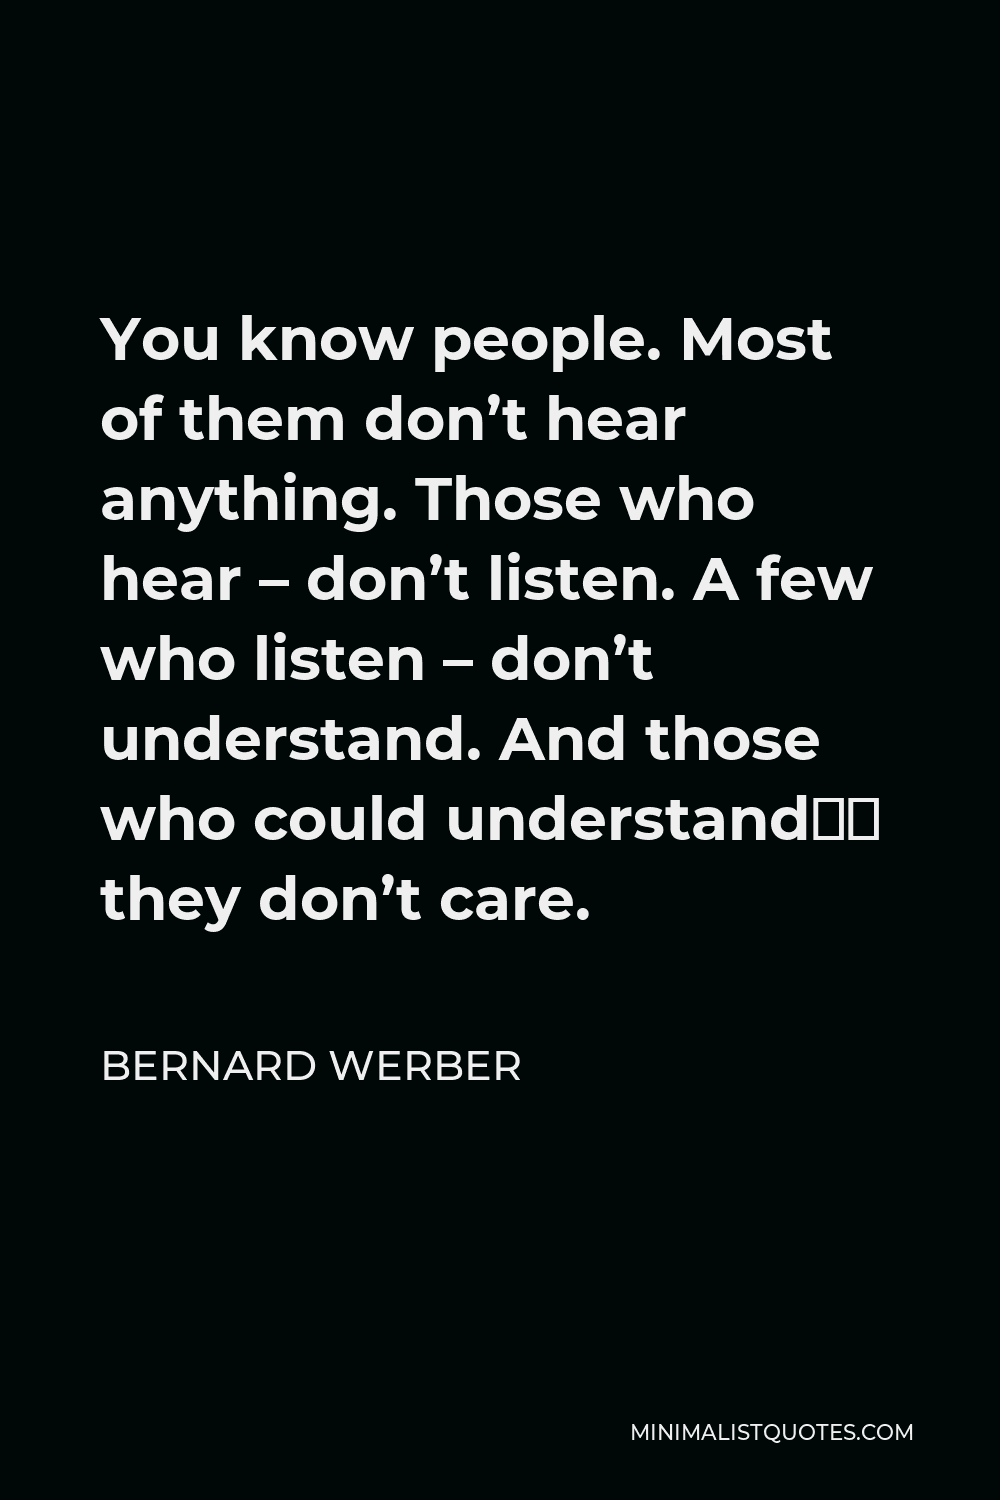 Bernard Werber Quote - You know people. Most of them don’t hear anything. Those who hear – don’t listen. A few who listen – don’t understand. And those who could understand… they don’t care.